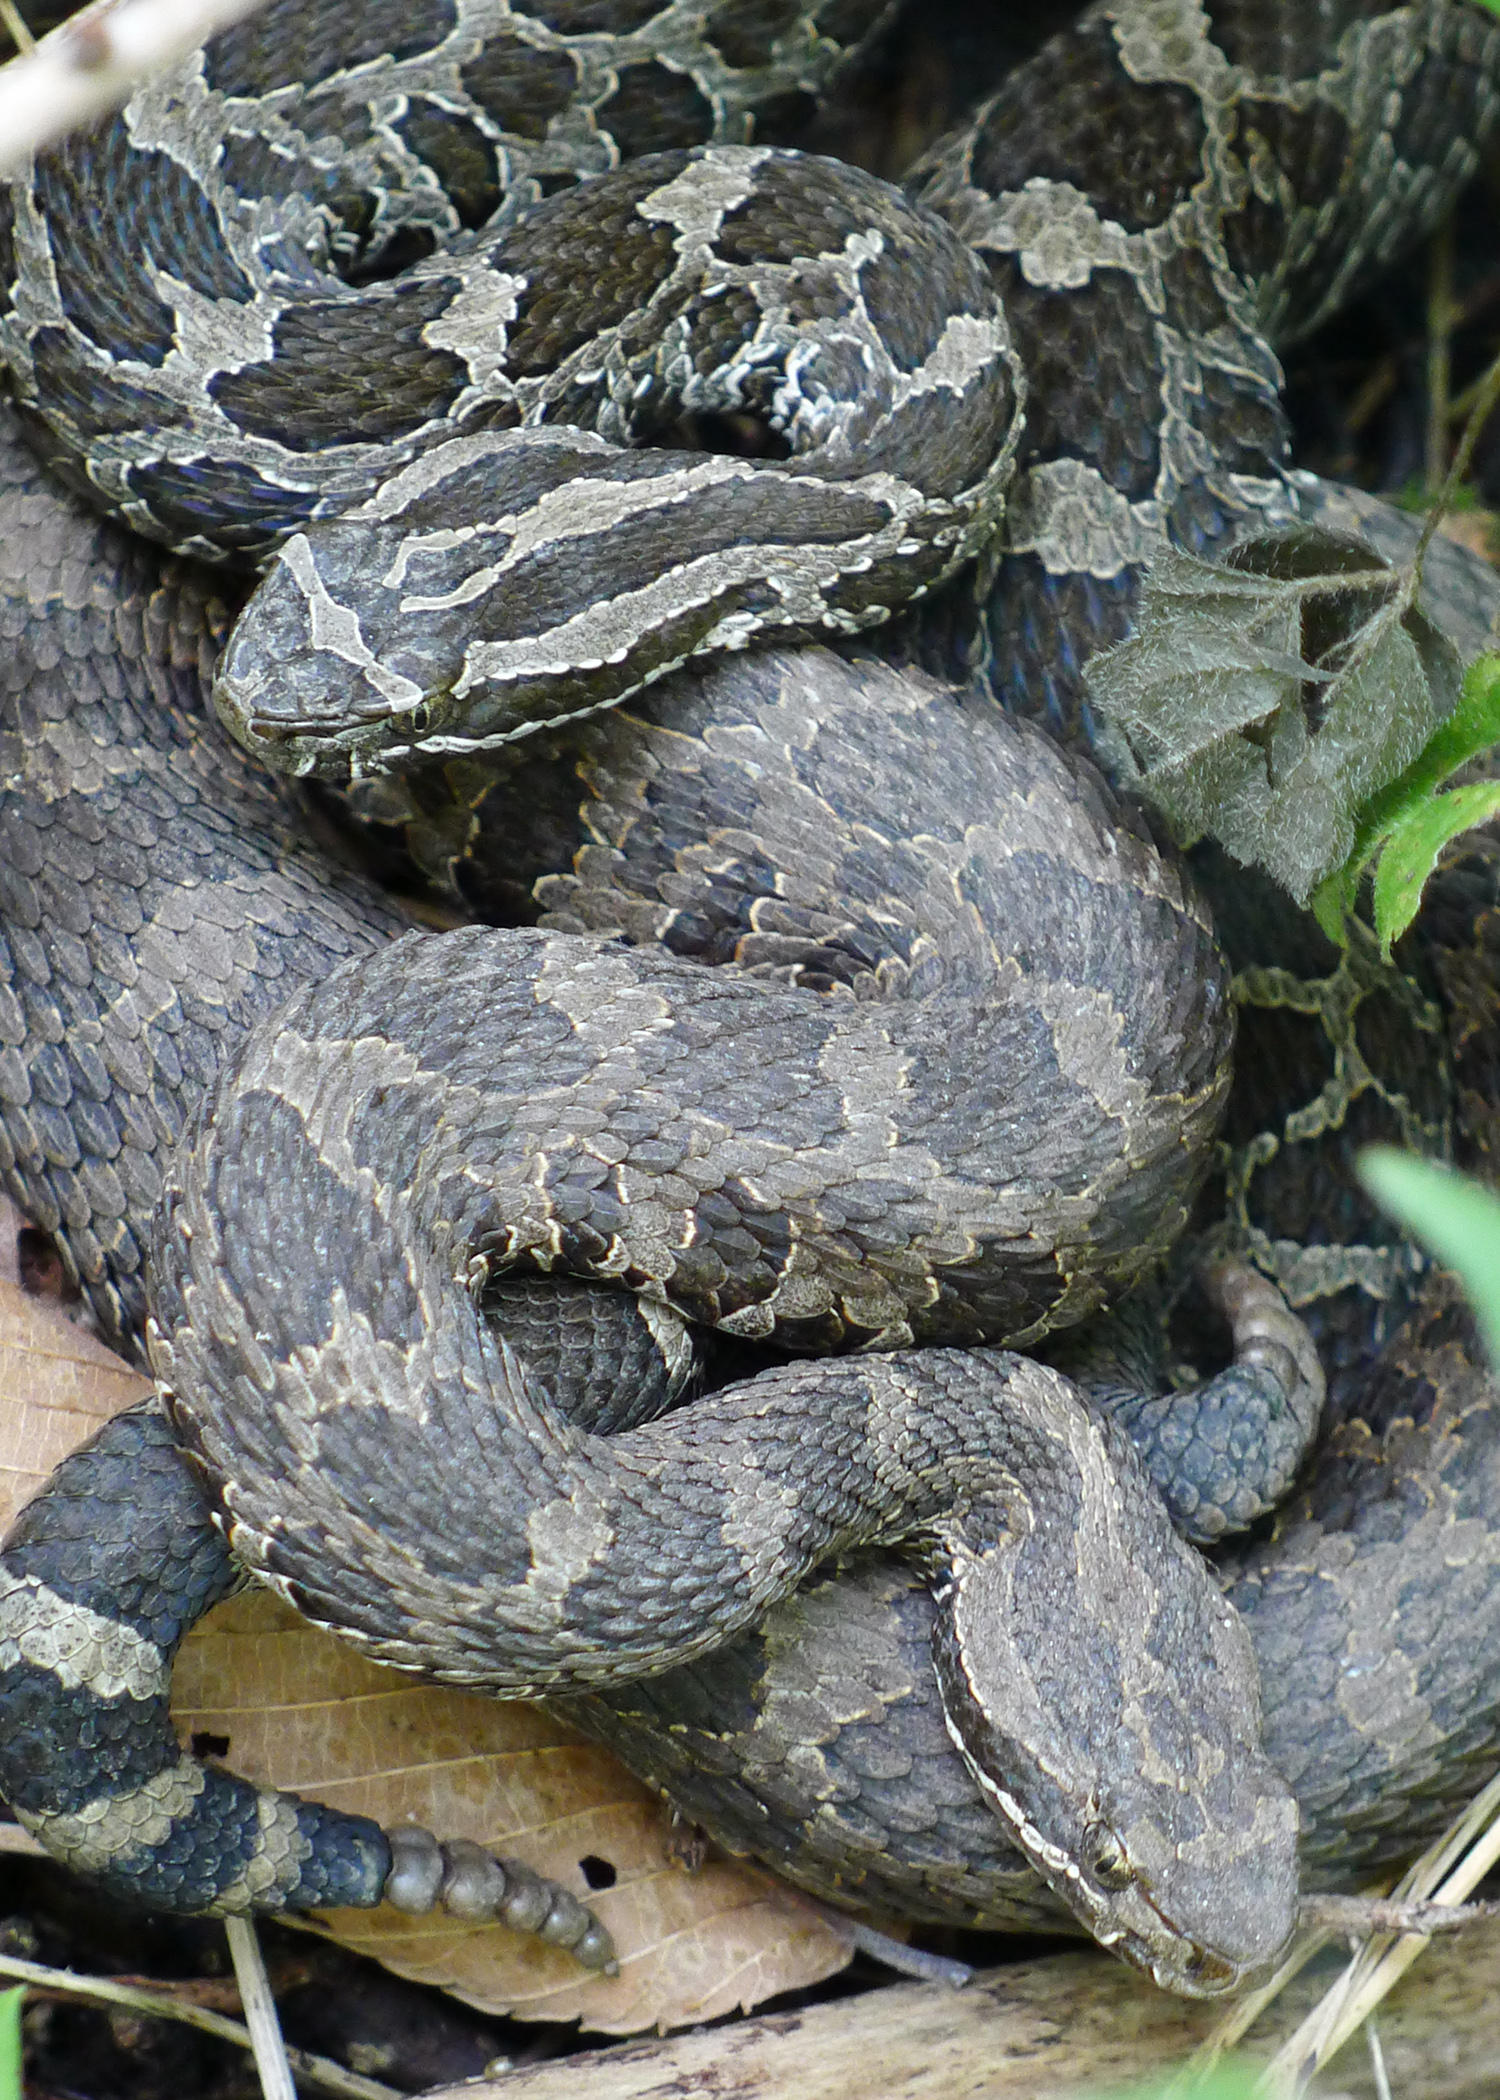 Only venomous rattlesnake in Michigan could be the next endangered